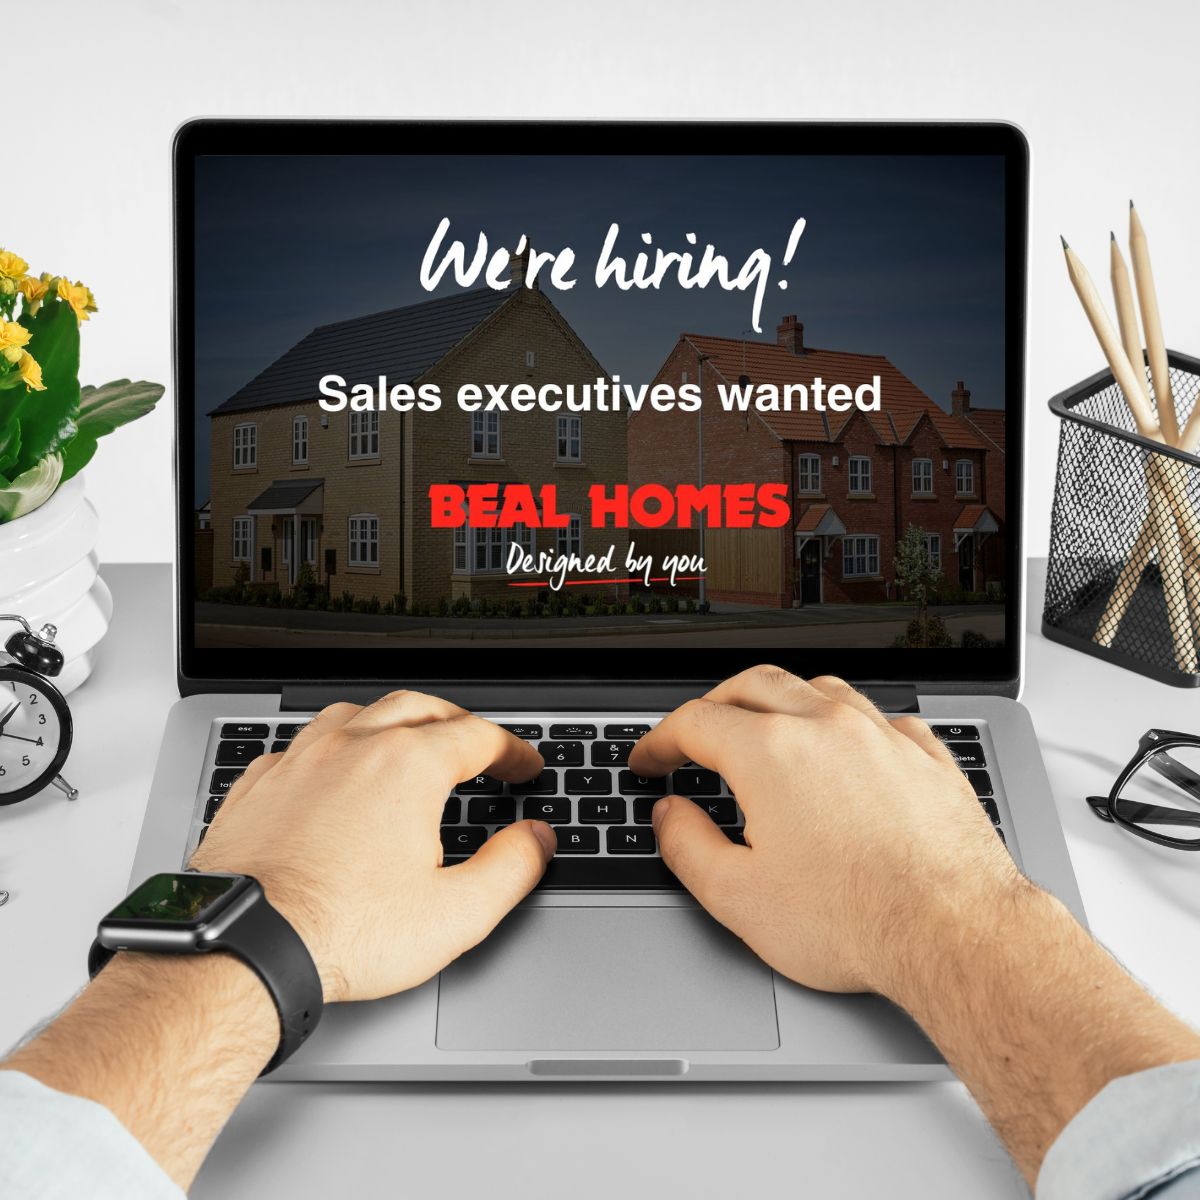 Join our award-winning team - Sales Executives wanted! We’re on the lookout for experienced full-time Sales Executives to be based at our luxury new build developments in East Yorkshire, and North and East Lincolnshire. For details and to apply visit: bit.ly/43tZzmY